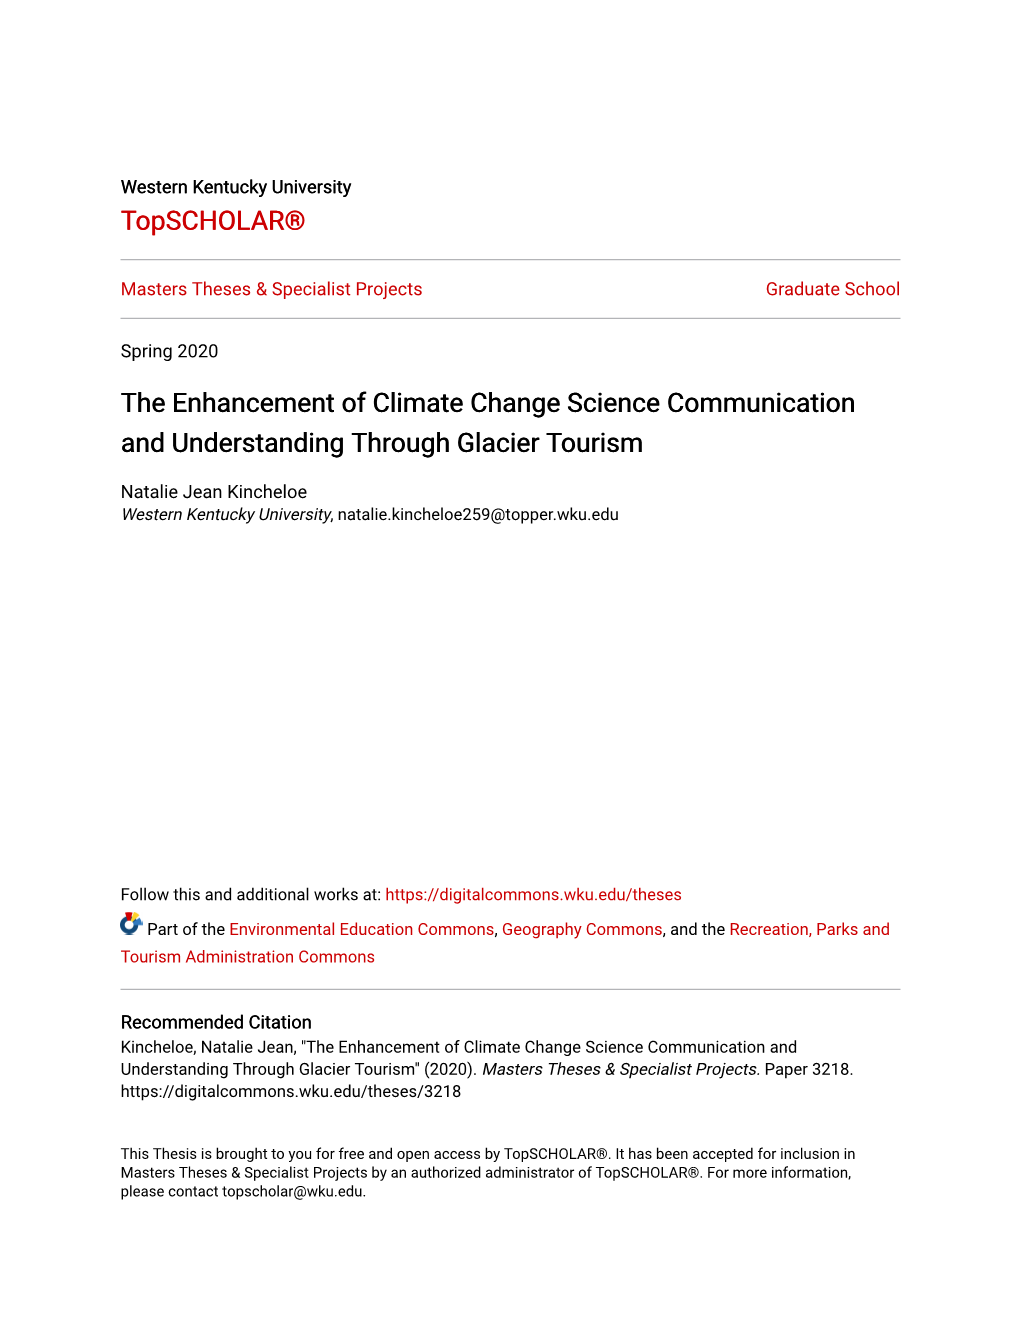 The Enhancement of Climate Change Science Communication and Understanding Through Glacier Tourism